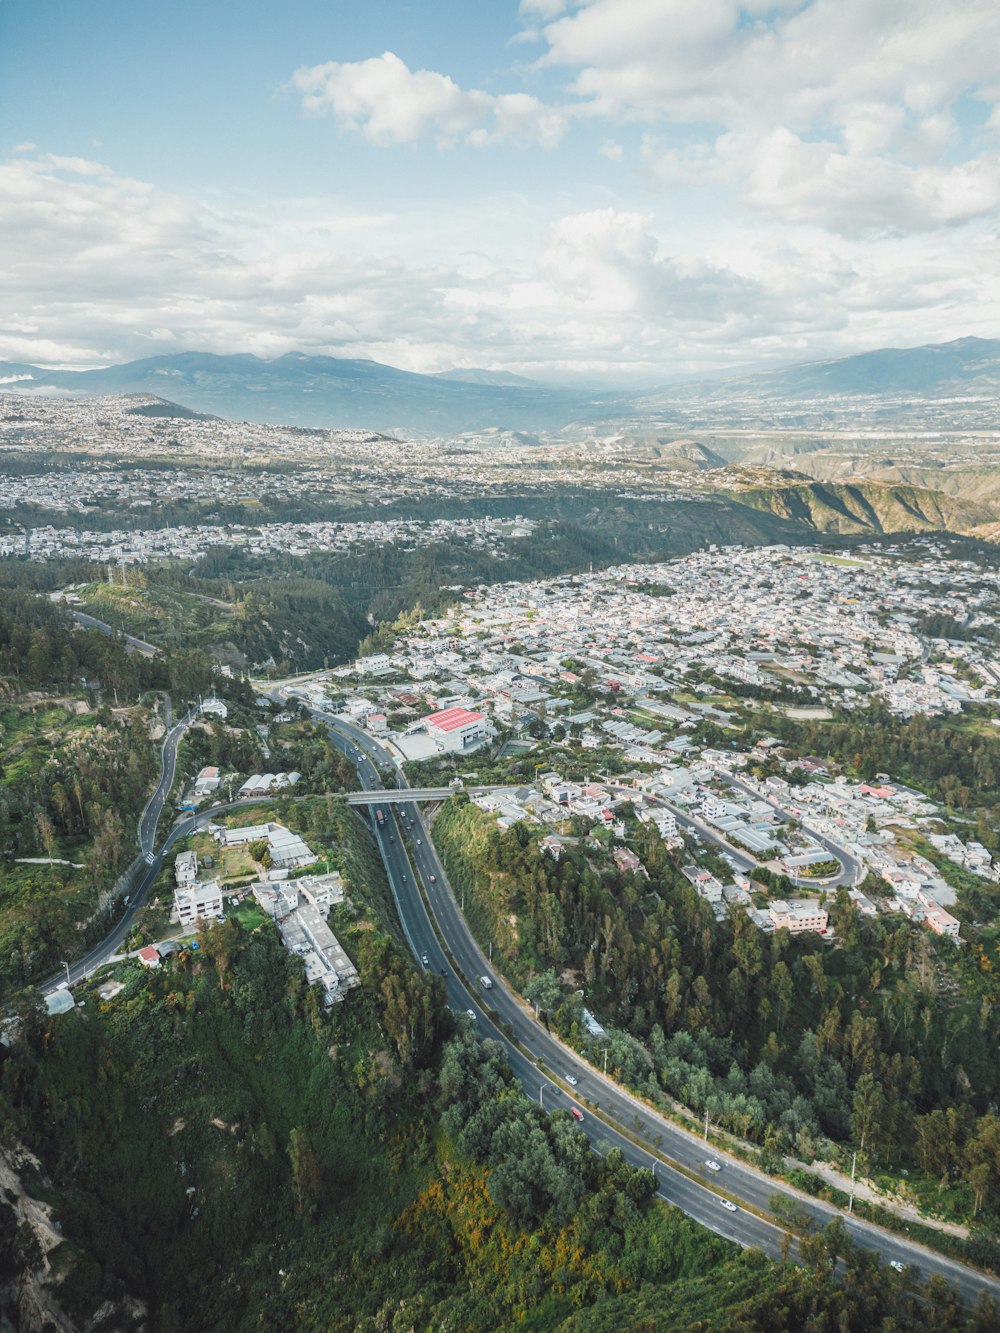 an aerial view of a city and a highway